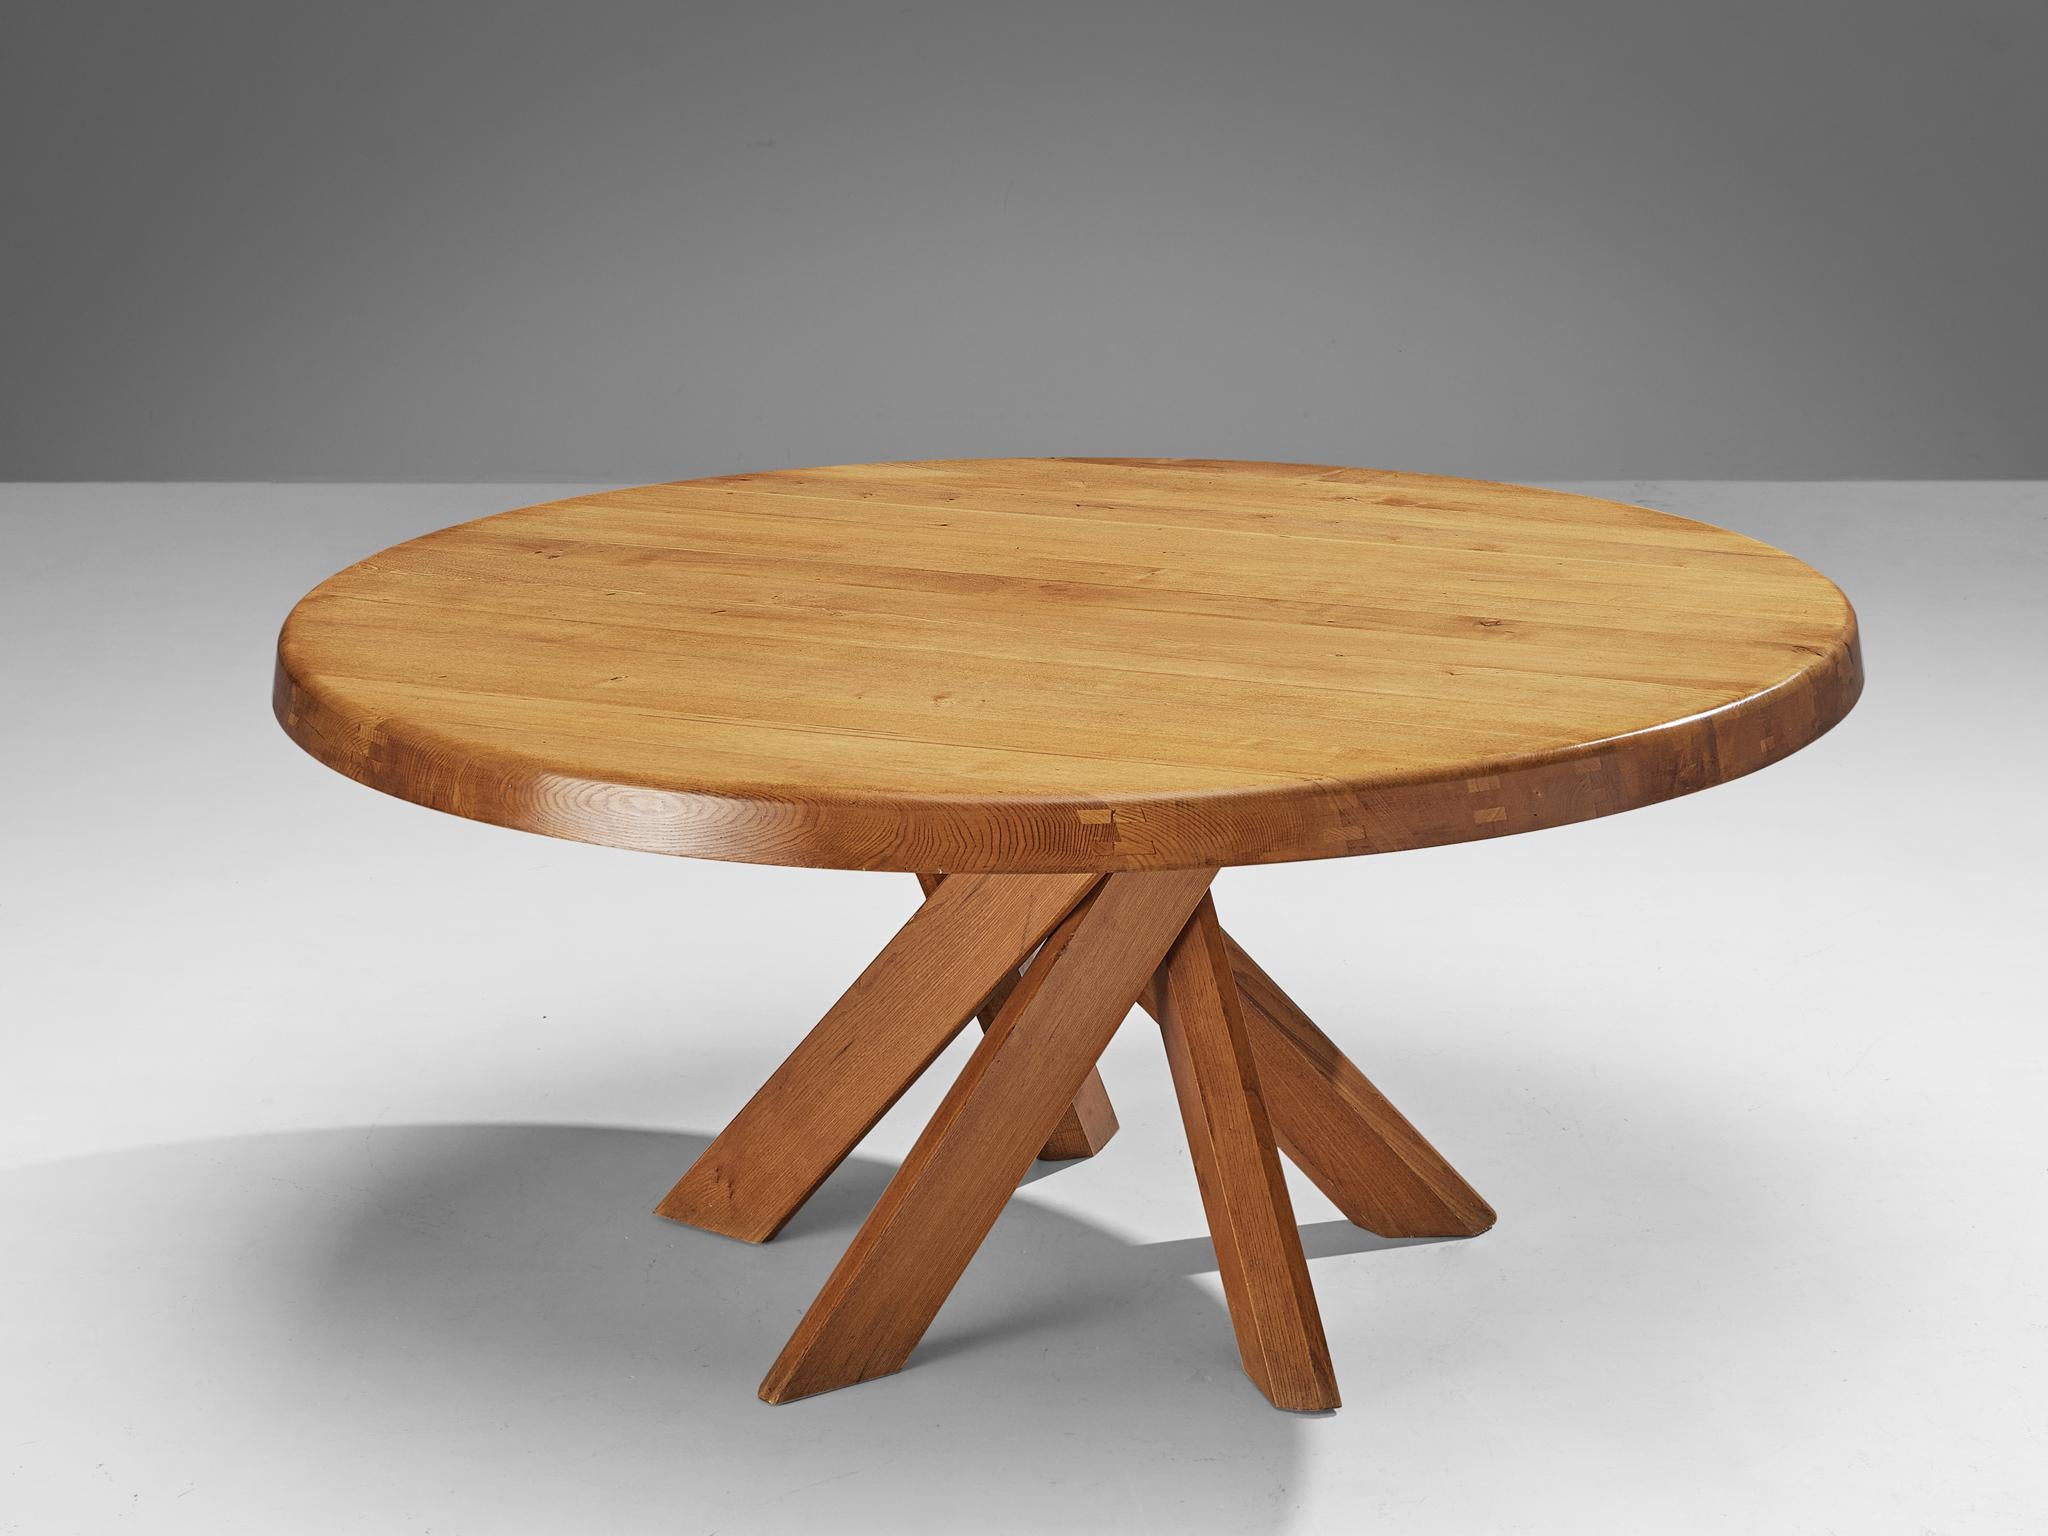 Pierre Chapo, 'Sfax' dining table, model 'T21E', elm, France, circa 1973

This table is one of the early editions designed by Pierre Chapo, known for his hallmark use of solid elmwood and a commitment to pure and clean design and construction